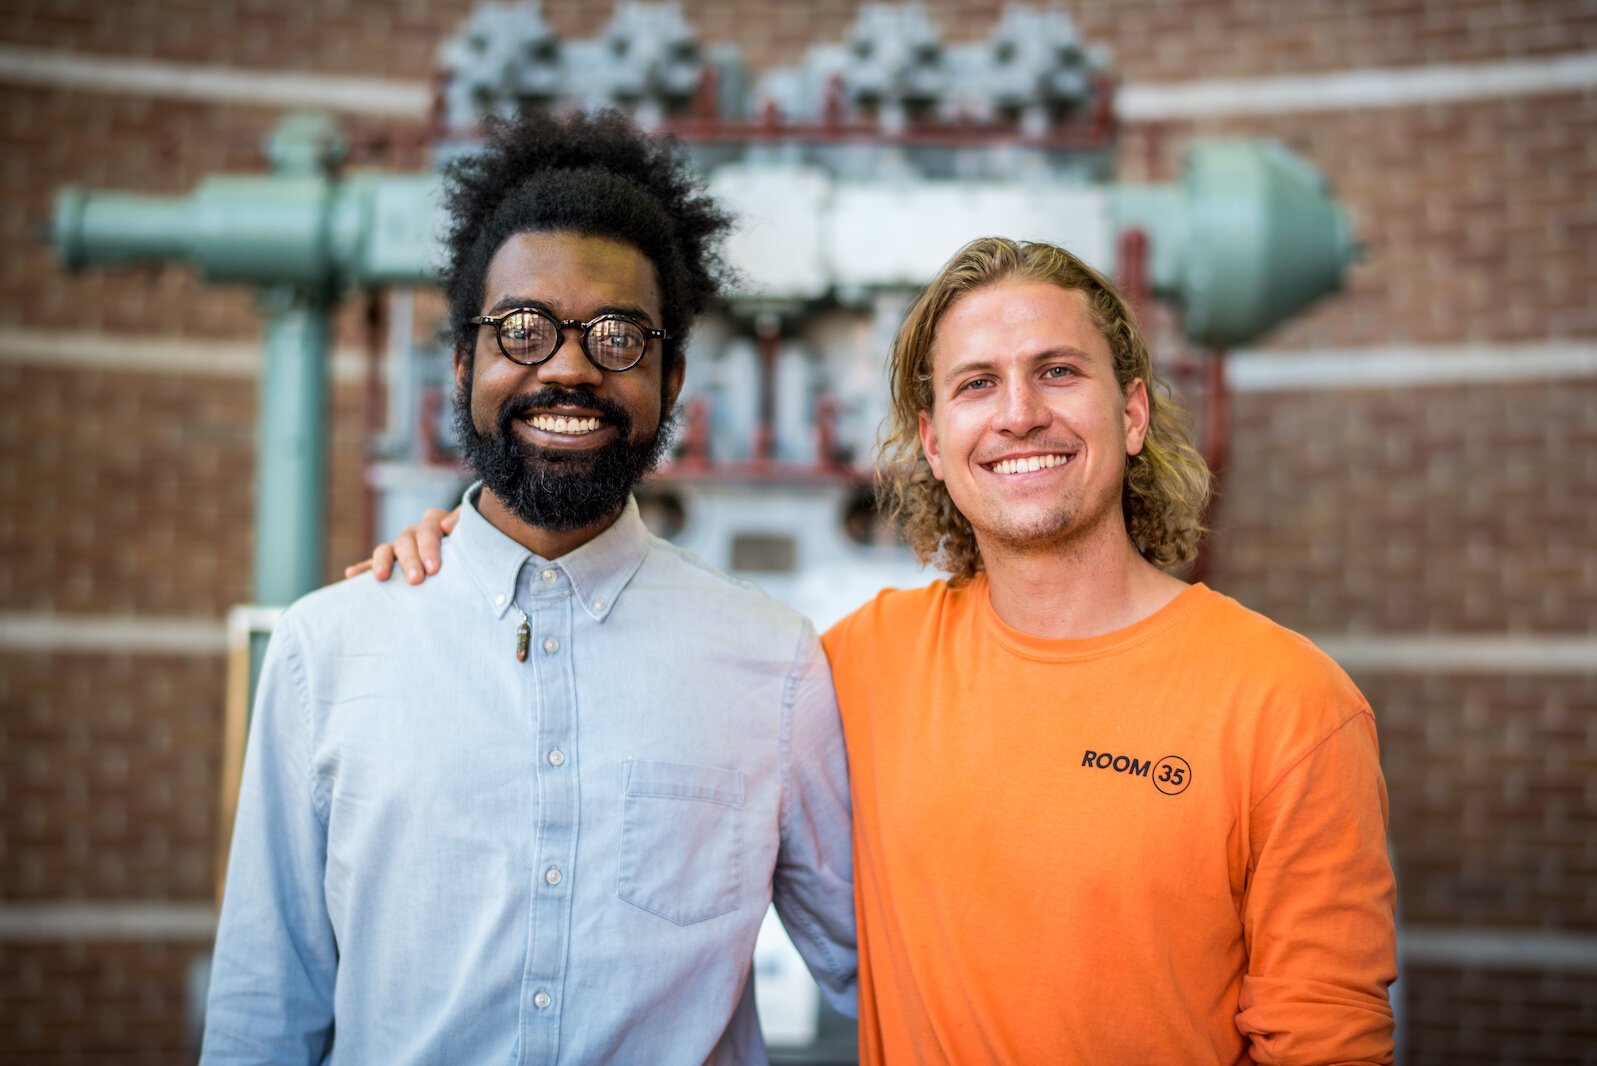 Joshua Gray, left, and Donovan McVey are partners in Room 35, a small business consulting firm in Kalamazoo. The two, both age 27, are entrepreneurs who learned the ins and outs of business and became friends while at Western Michigan University.